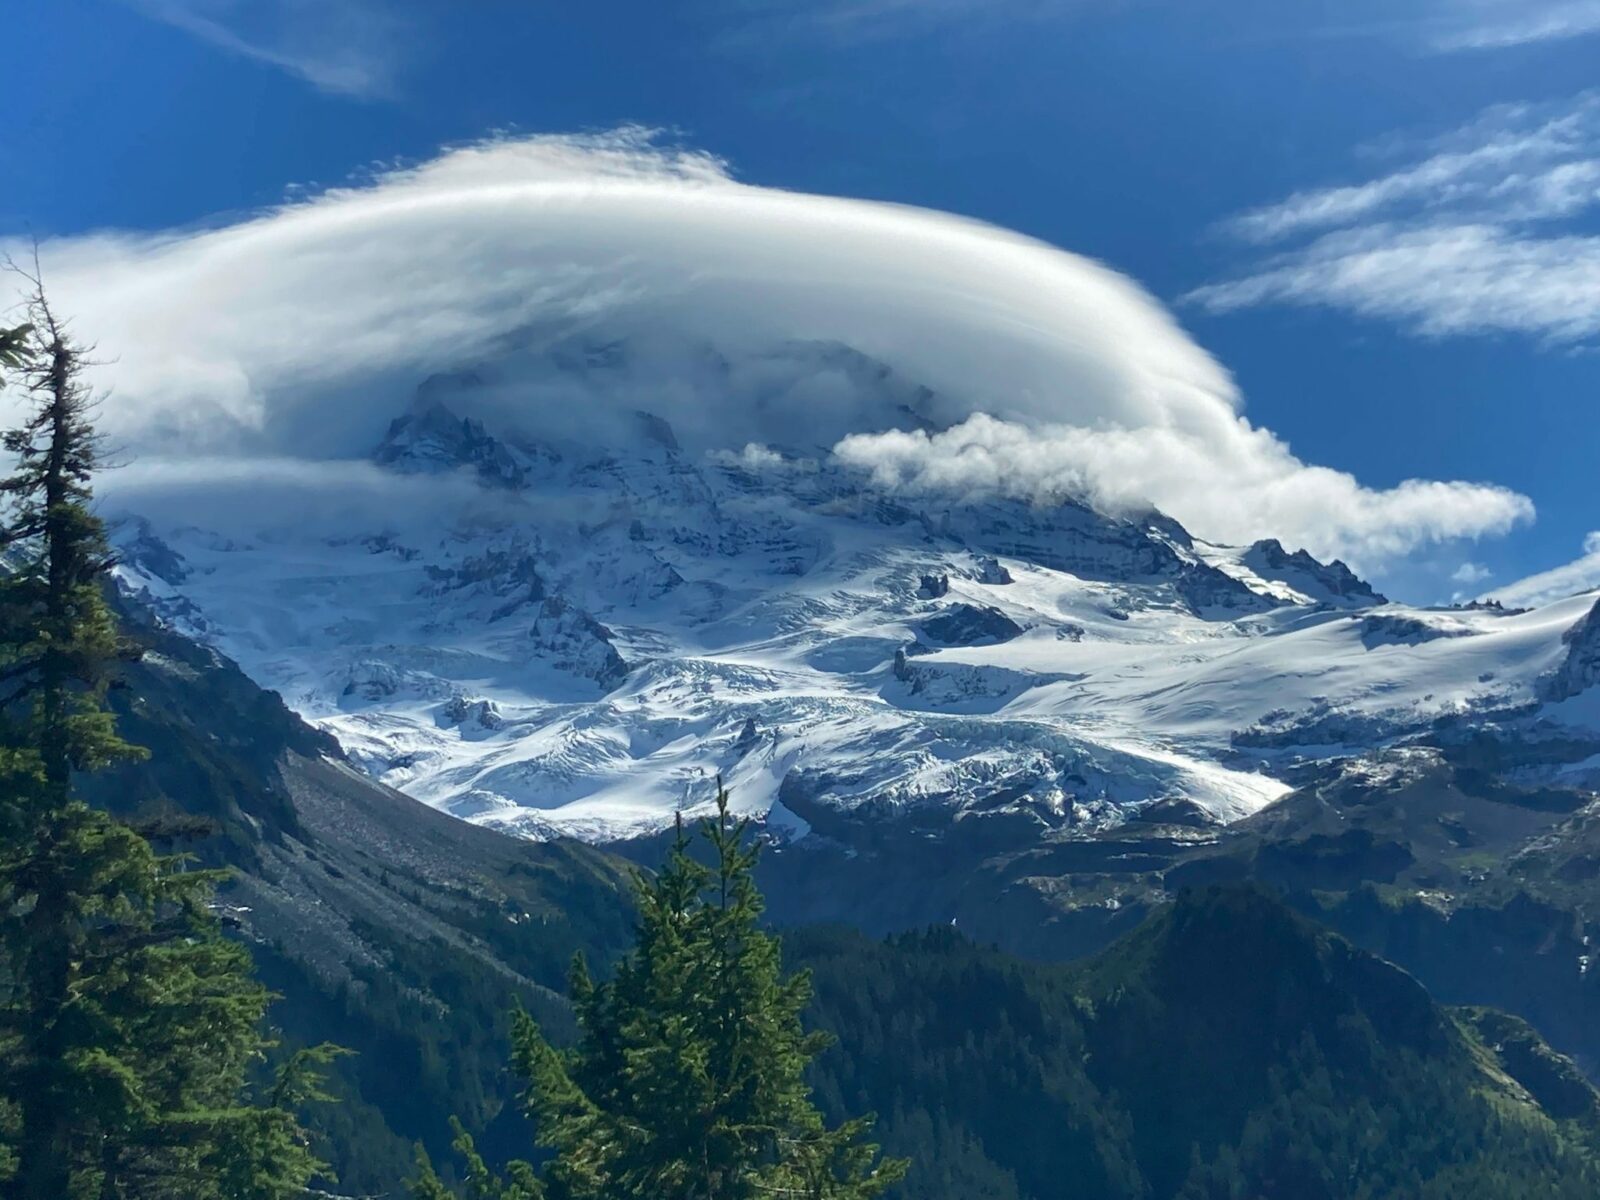 Mt Rainier, a high snowcovered mountain has clouds around it's summit and sides. There are glaciers and rocks visible on the mountain. In the foreground are forested hillsides.